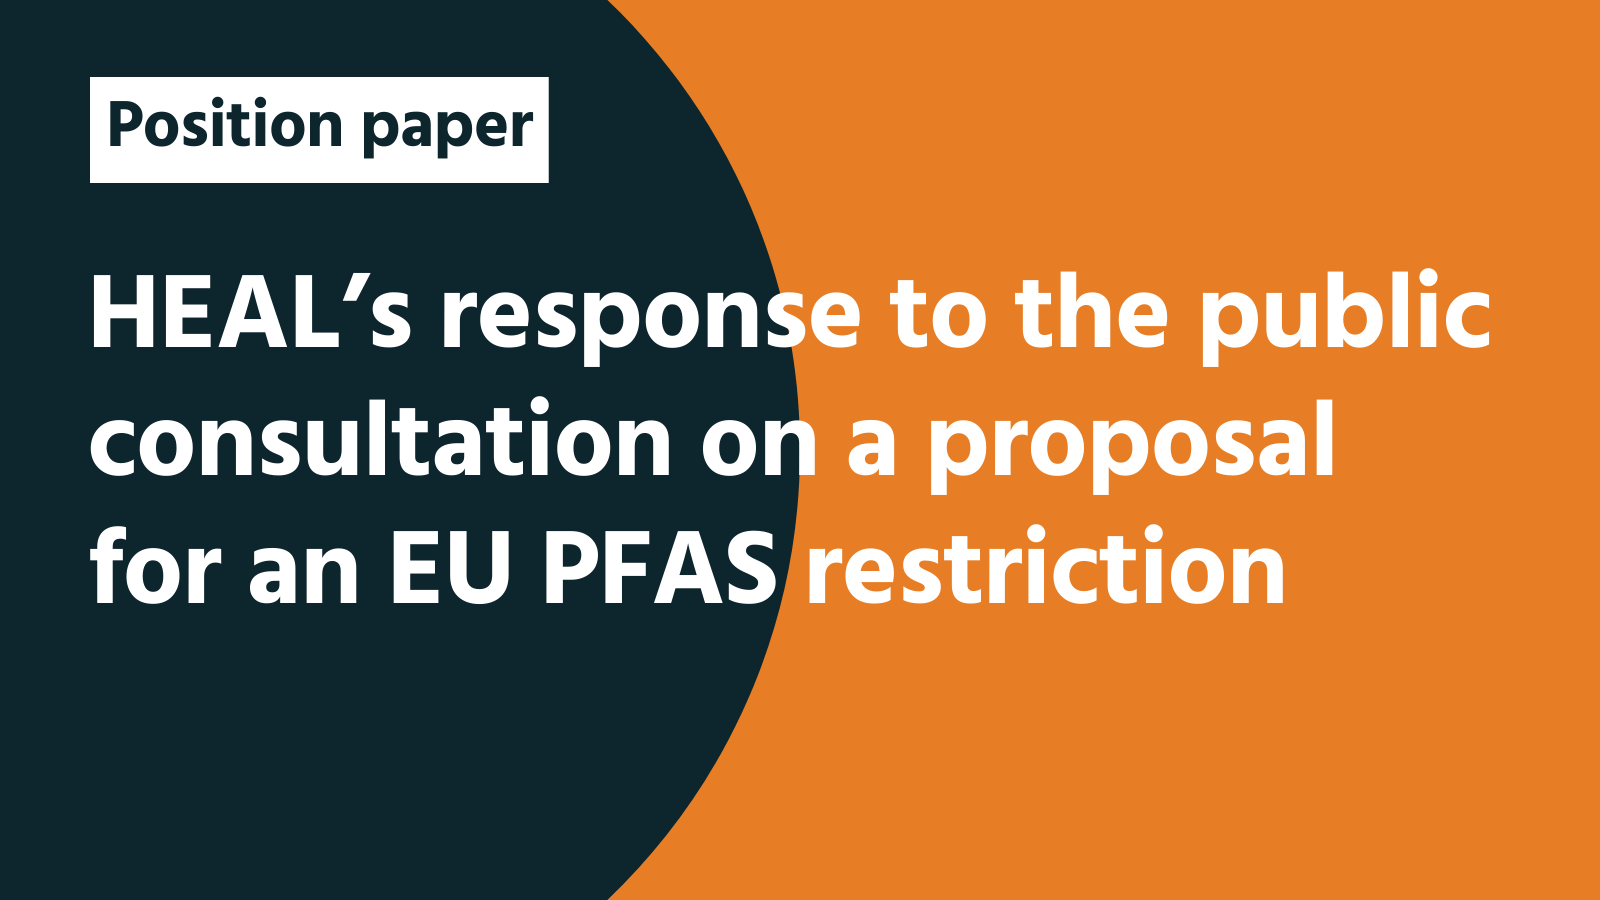 HEAL’s response to the public consultation on a proposal for an EU PFAS restriction